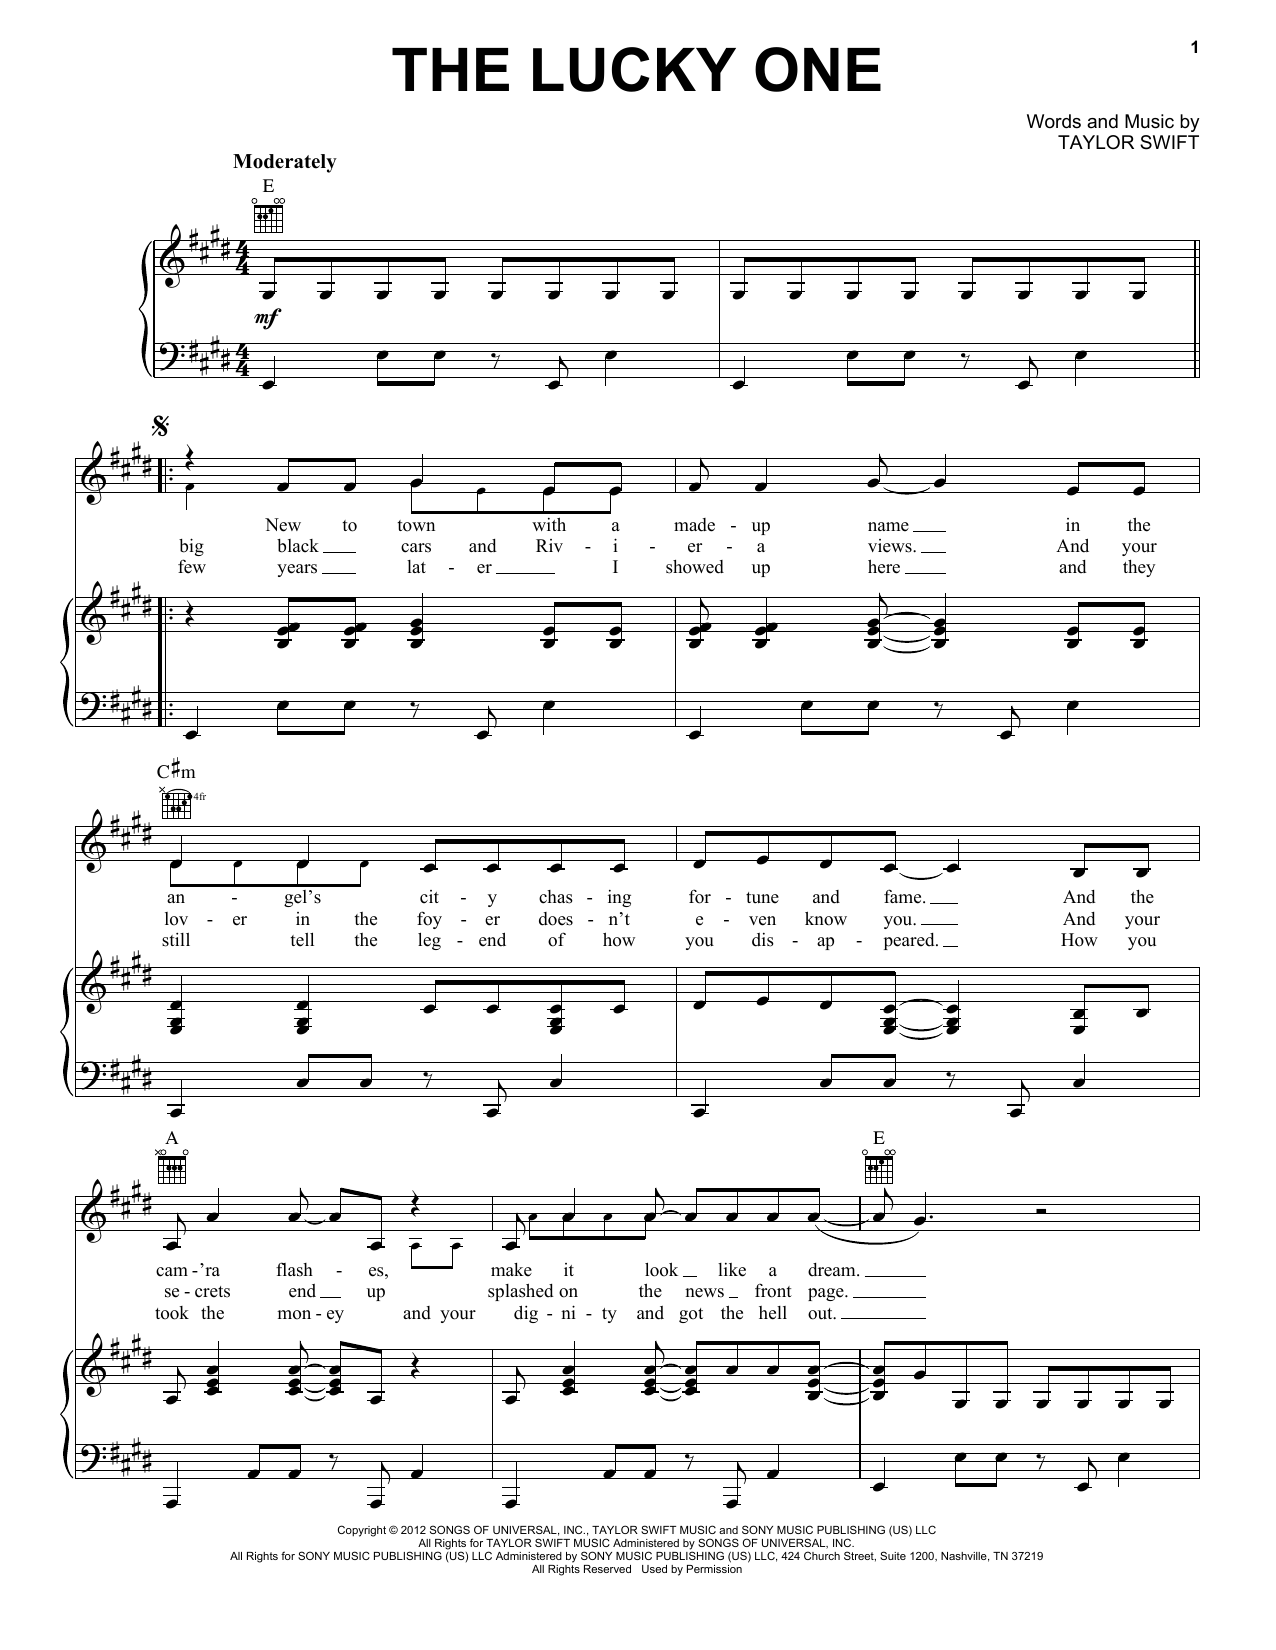 Download Taylor Swift The Lucky One Sheet Music